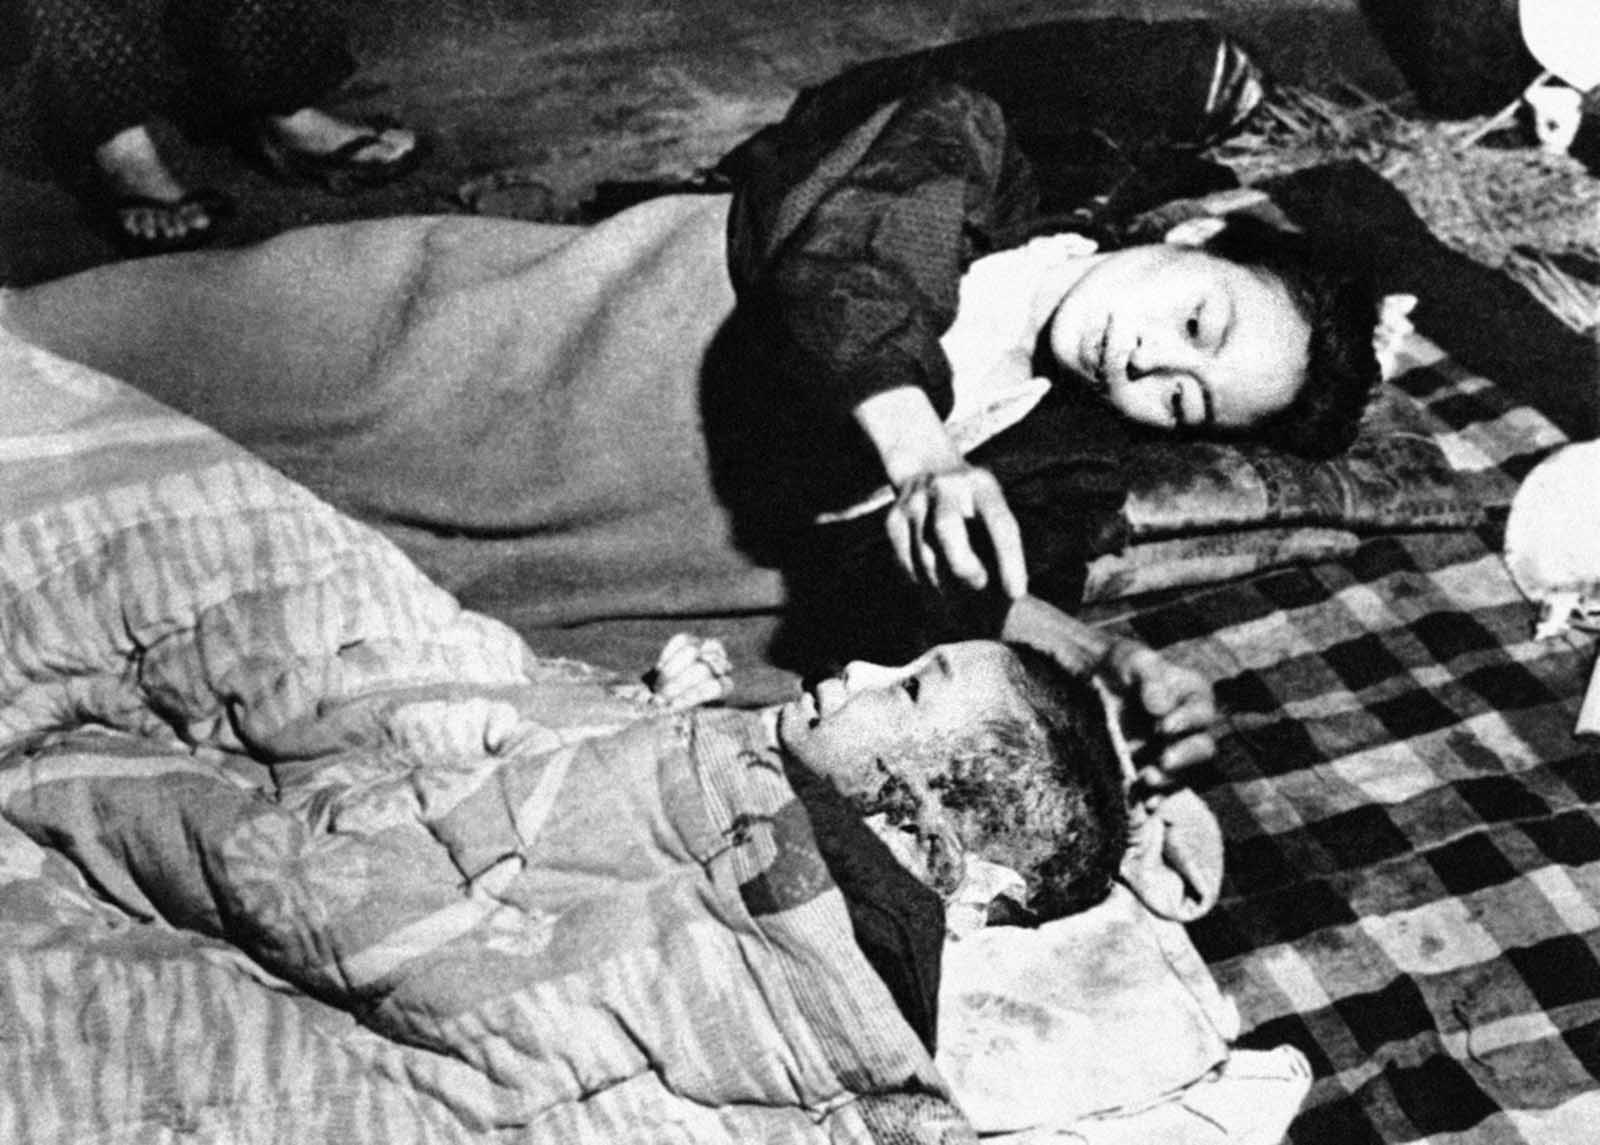 A Japanese woman and her child, casualties in the atomic bombing of Hiroshima, lie on a blanket on the floor of a damaged bank building converted into a hospital and located near the center of the devastated town, on October 6, 1945.